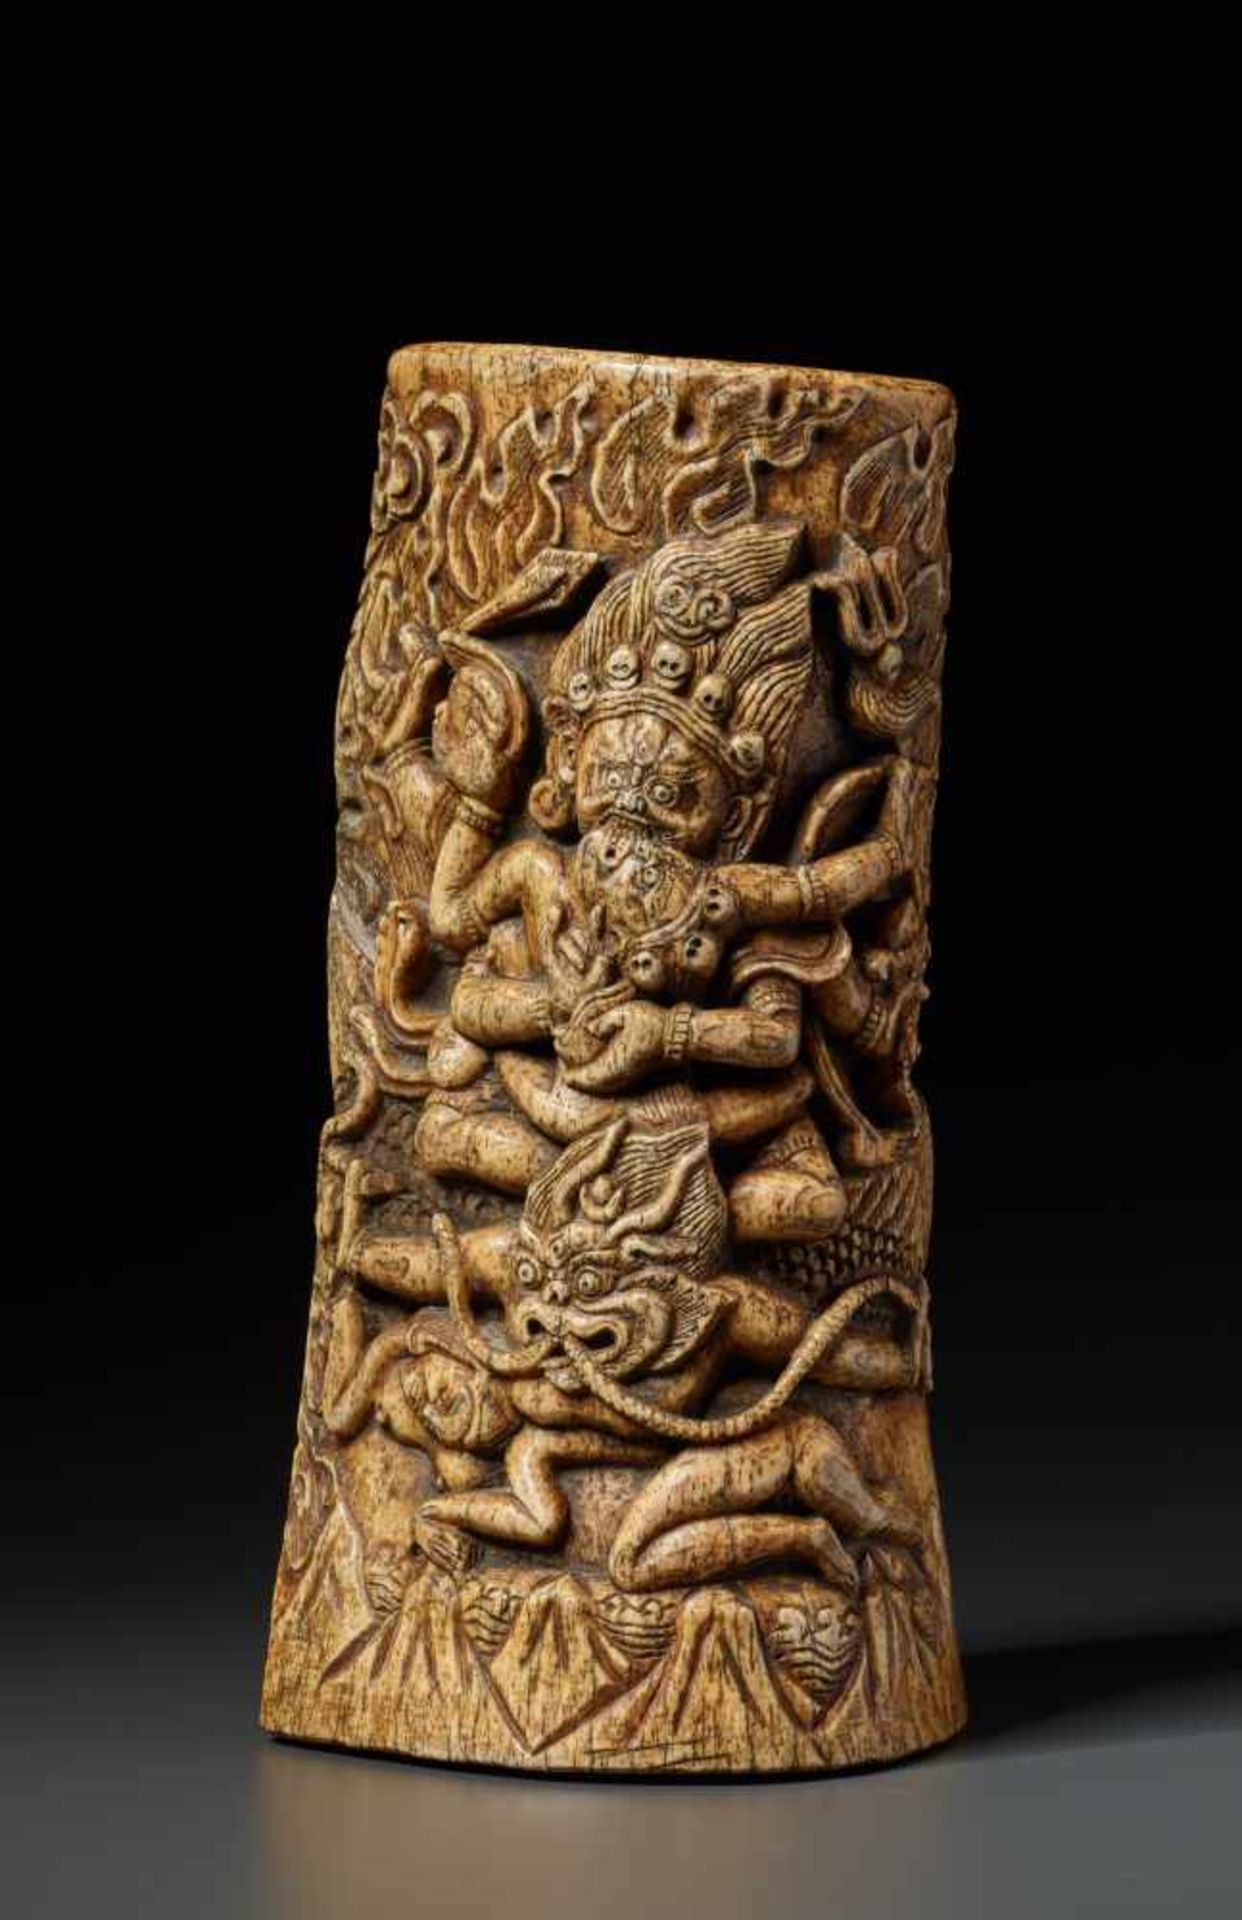 A VERY LARGE TANTRIC BONE CARVING WITH MAHAKALA AND VAJRAYOGINI, 17th – 18th CENTURYBone with